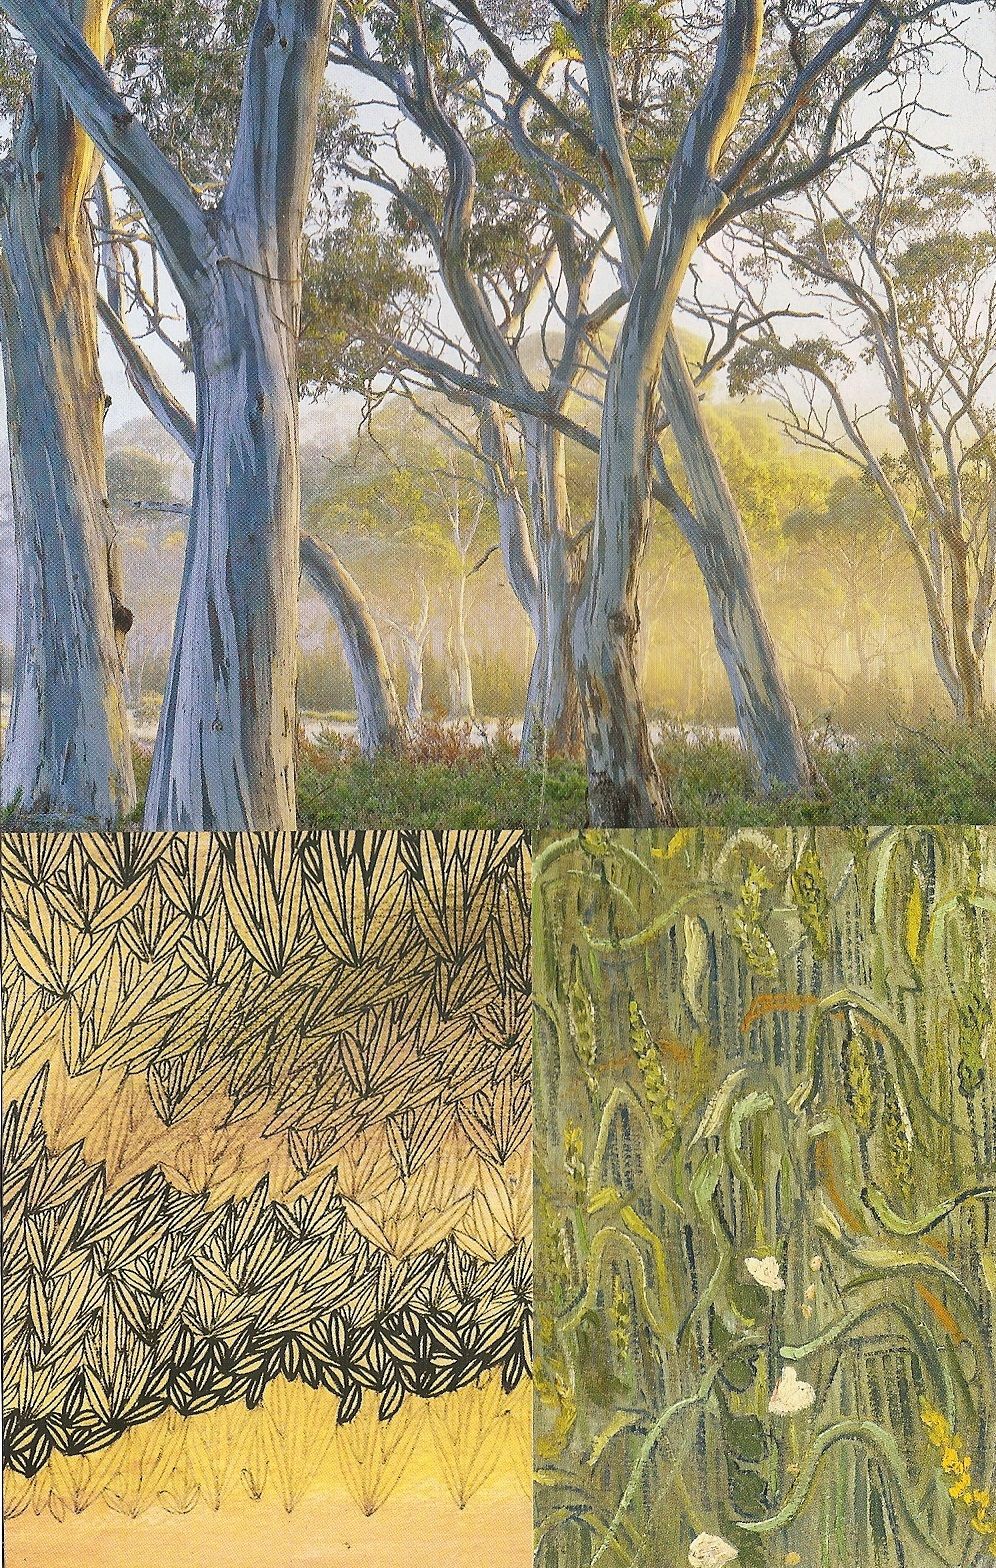 A collage image of eucalyptus trees in in the mist, patterned leaves drawn in ink and a wheat field painted in impressionist style.